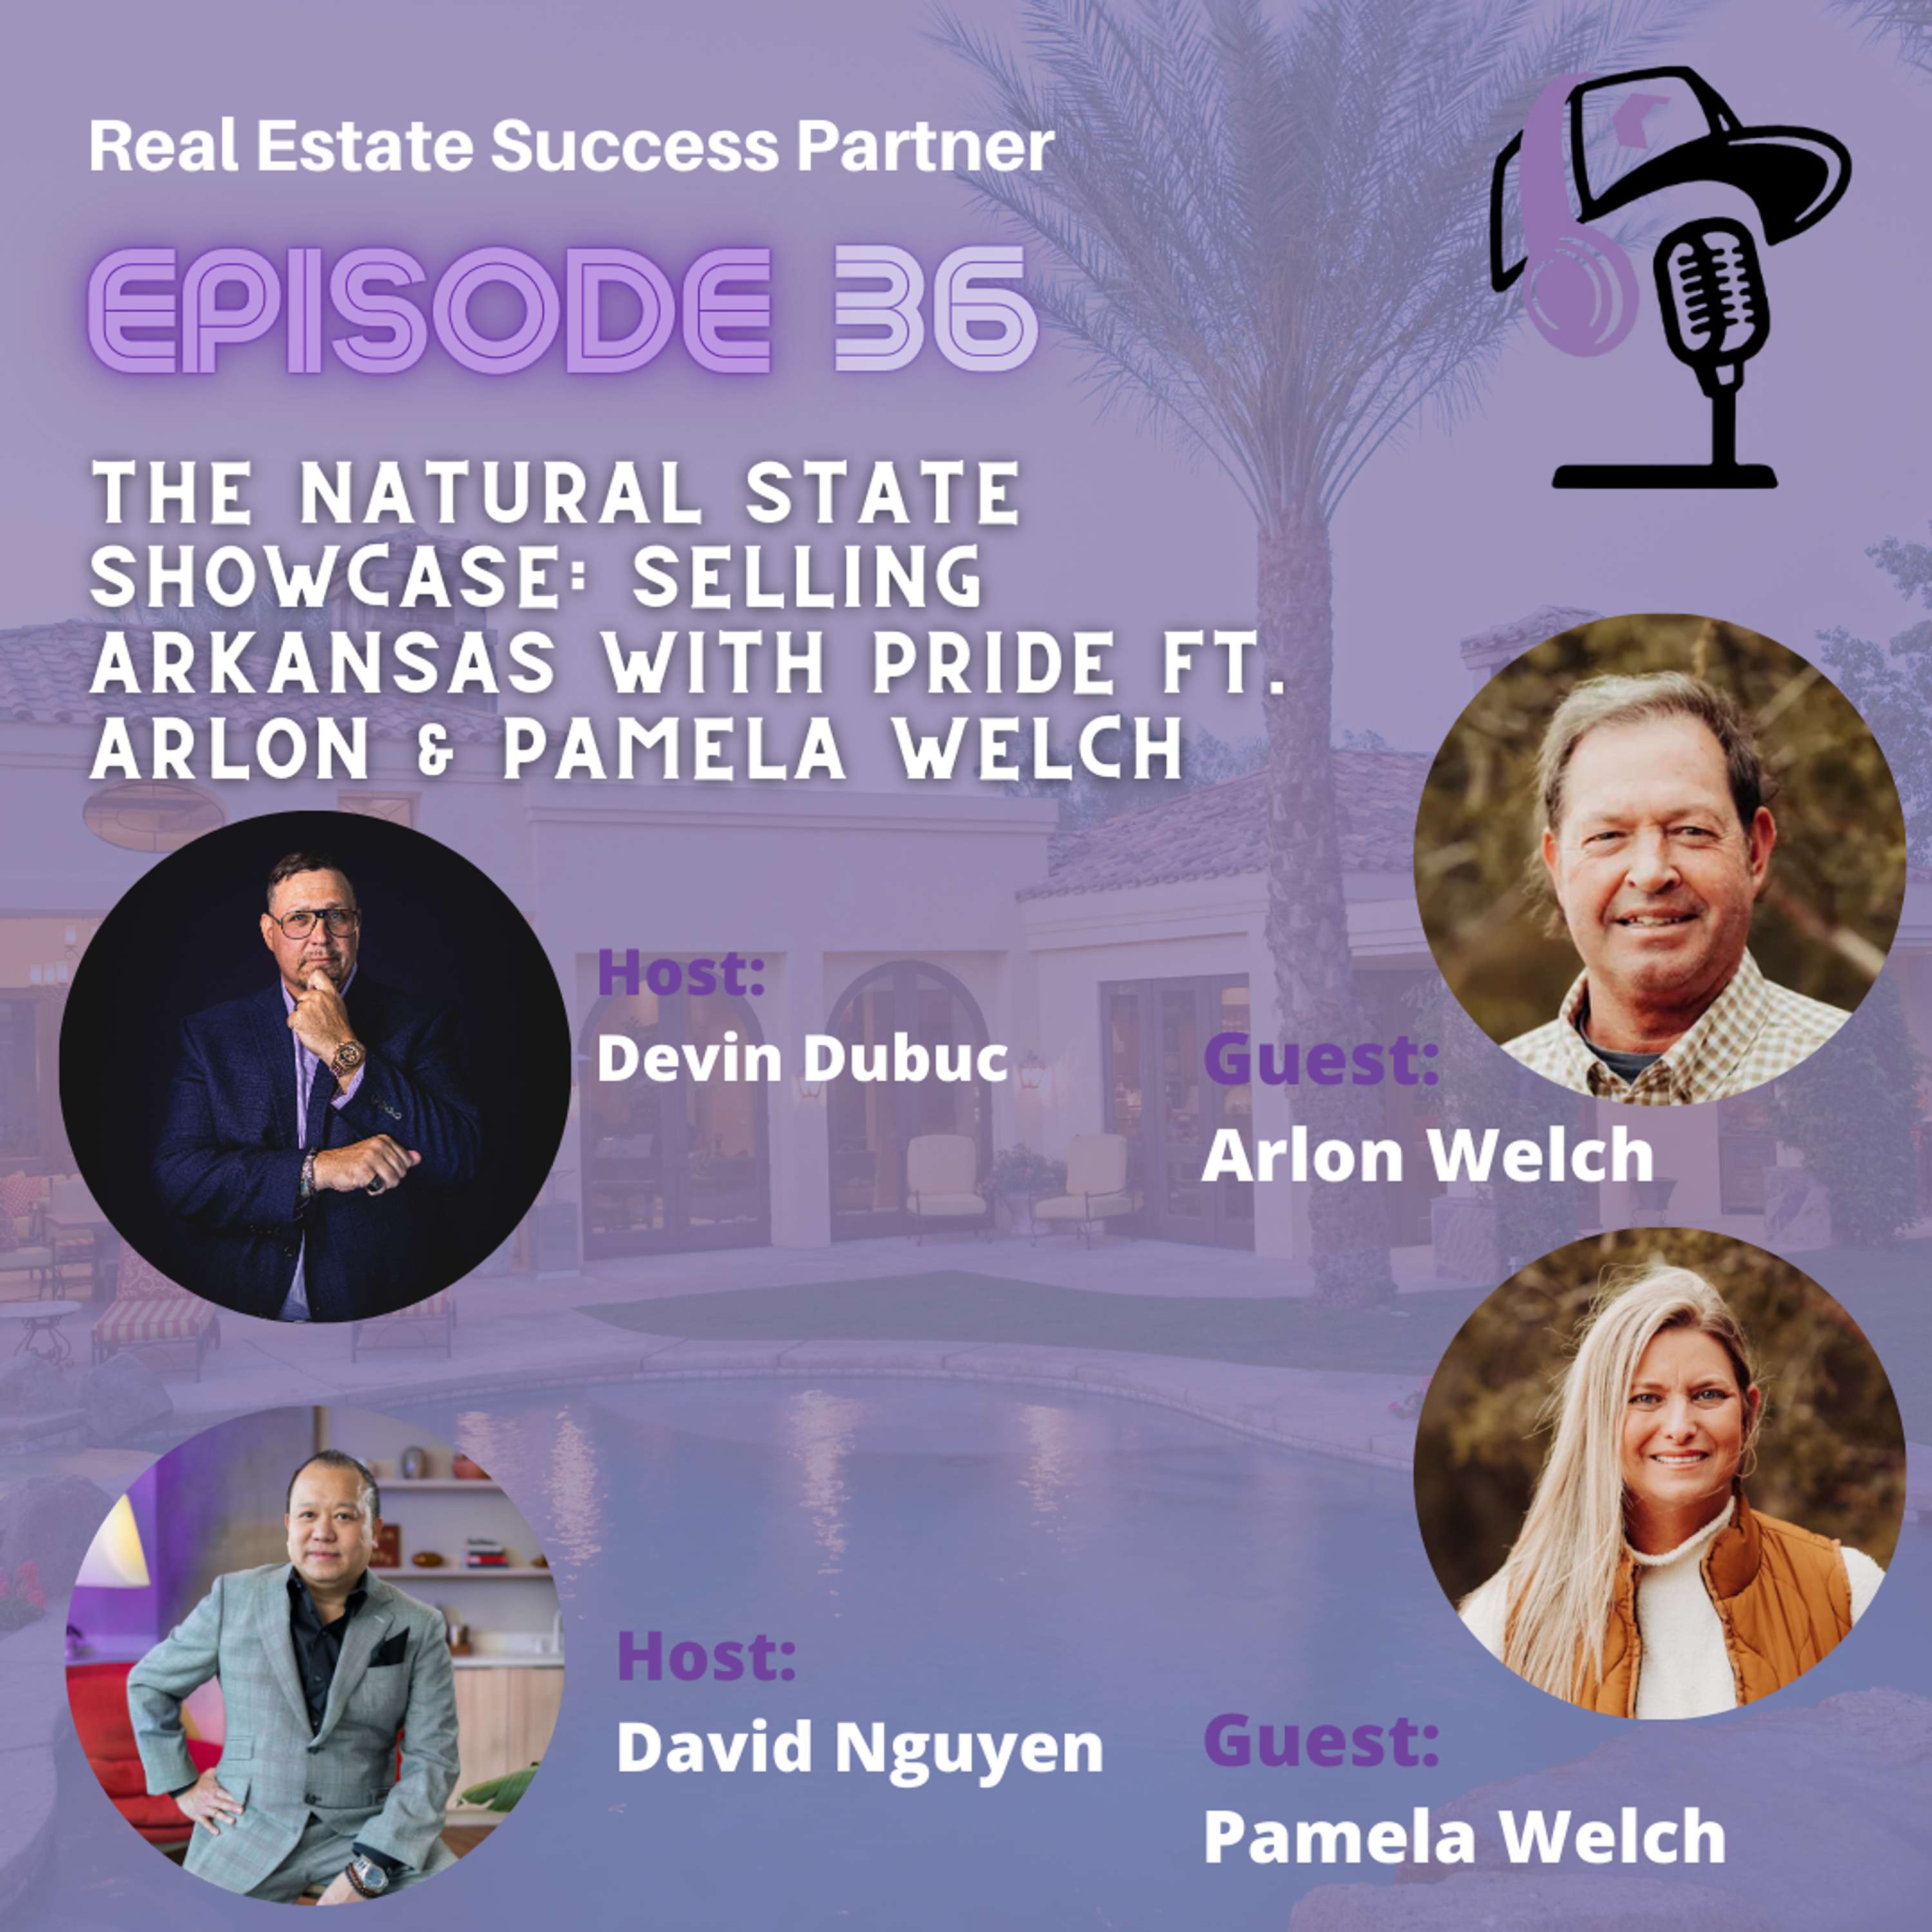 Episode 36: The Natural State Showcase: Selling Arkansas with Pride ft. Arlon & Pamela Welch